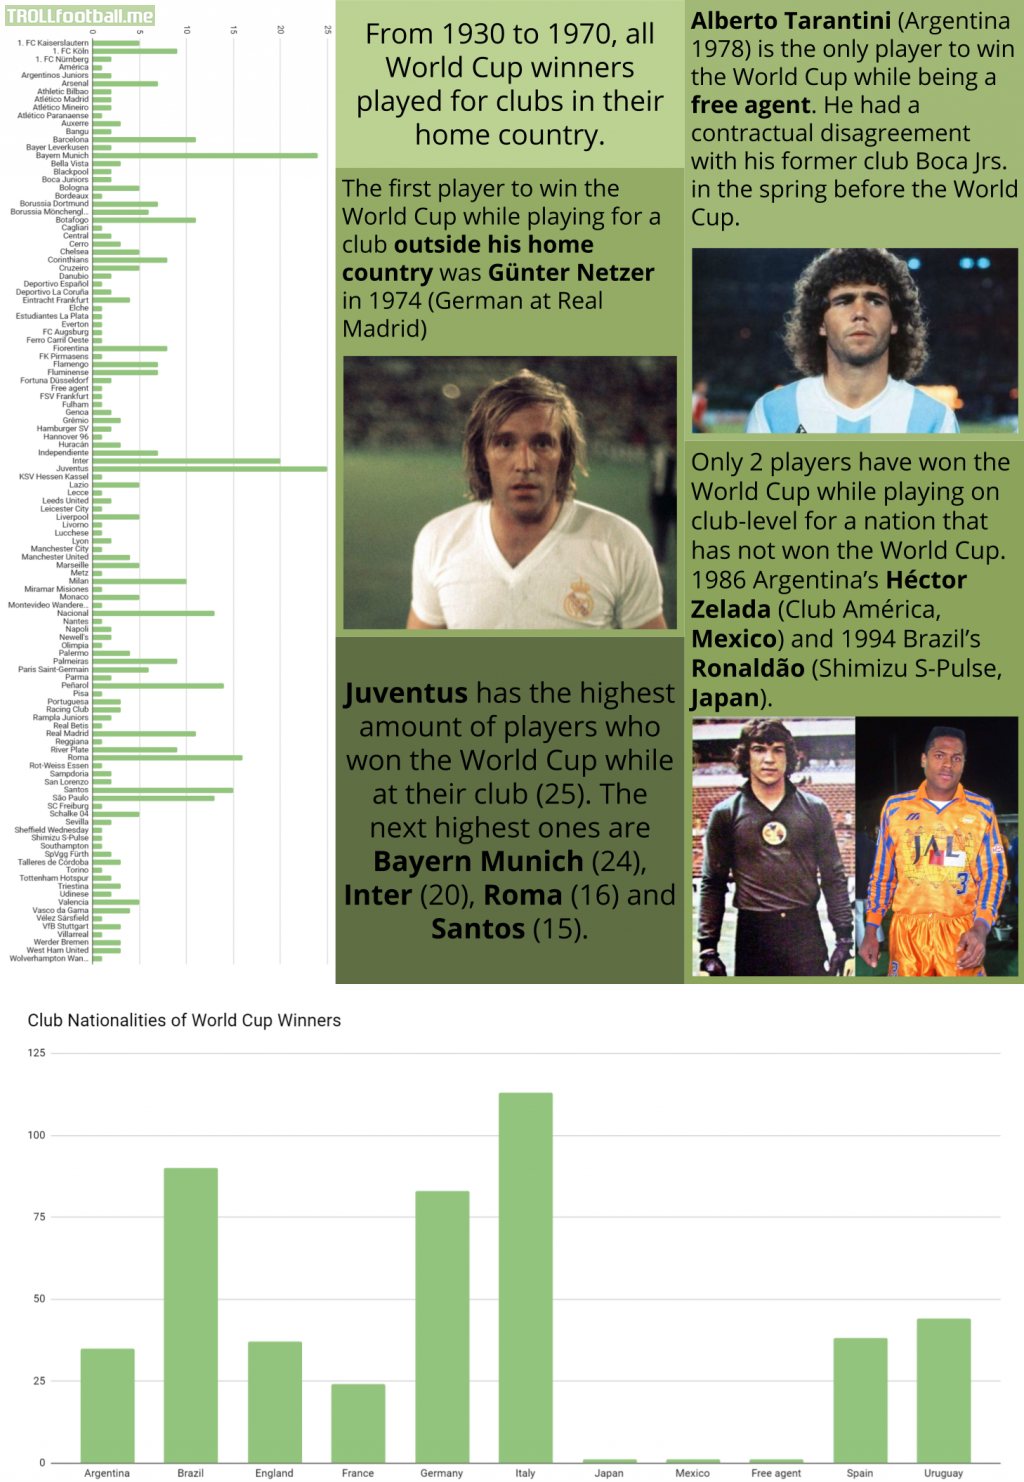 Analyzing the clubs of World Cup winners [OC]